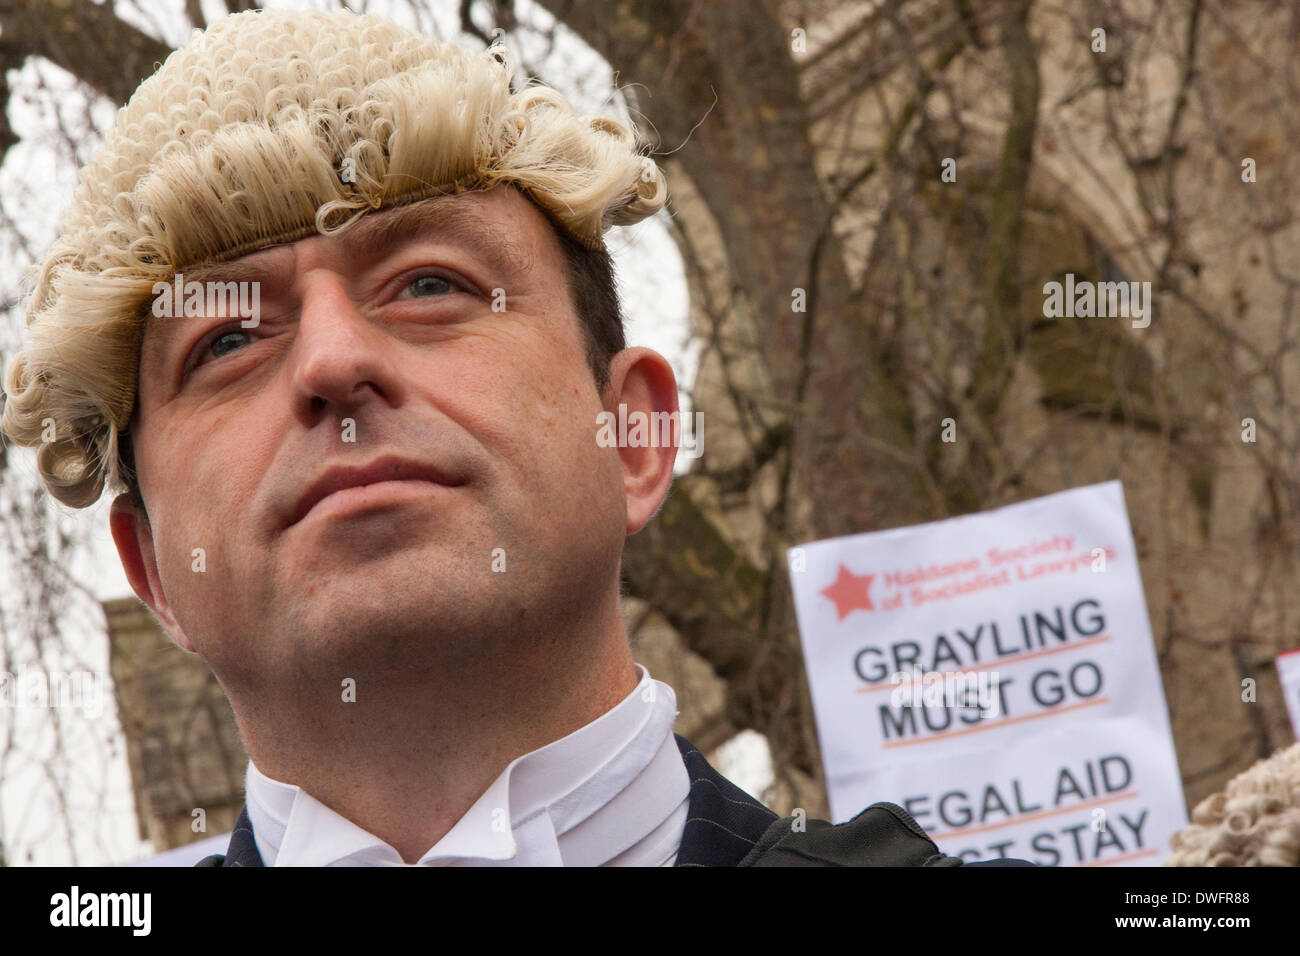 London March 7th 2014. Barristers and solicitors in London walk out in protest against further cuts of £215 million to the legal aid budget, and a reduction by a third of duty lawyers' contracts. Credit:  Paul Davey/Alamy Live News Stock Photo